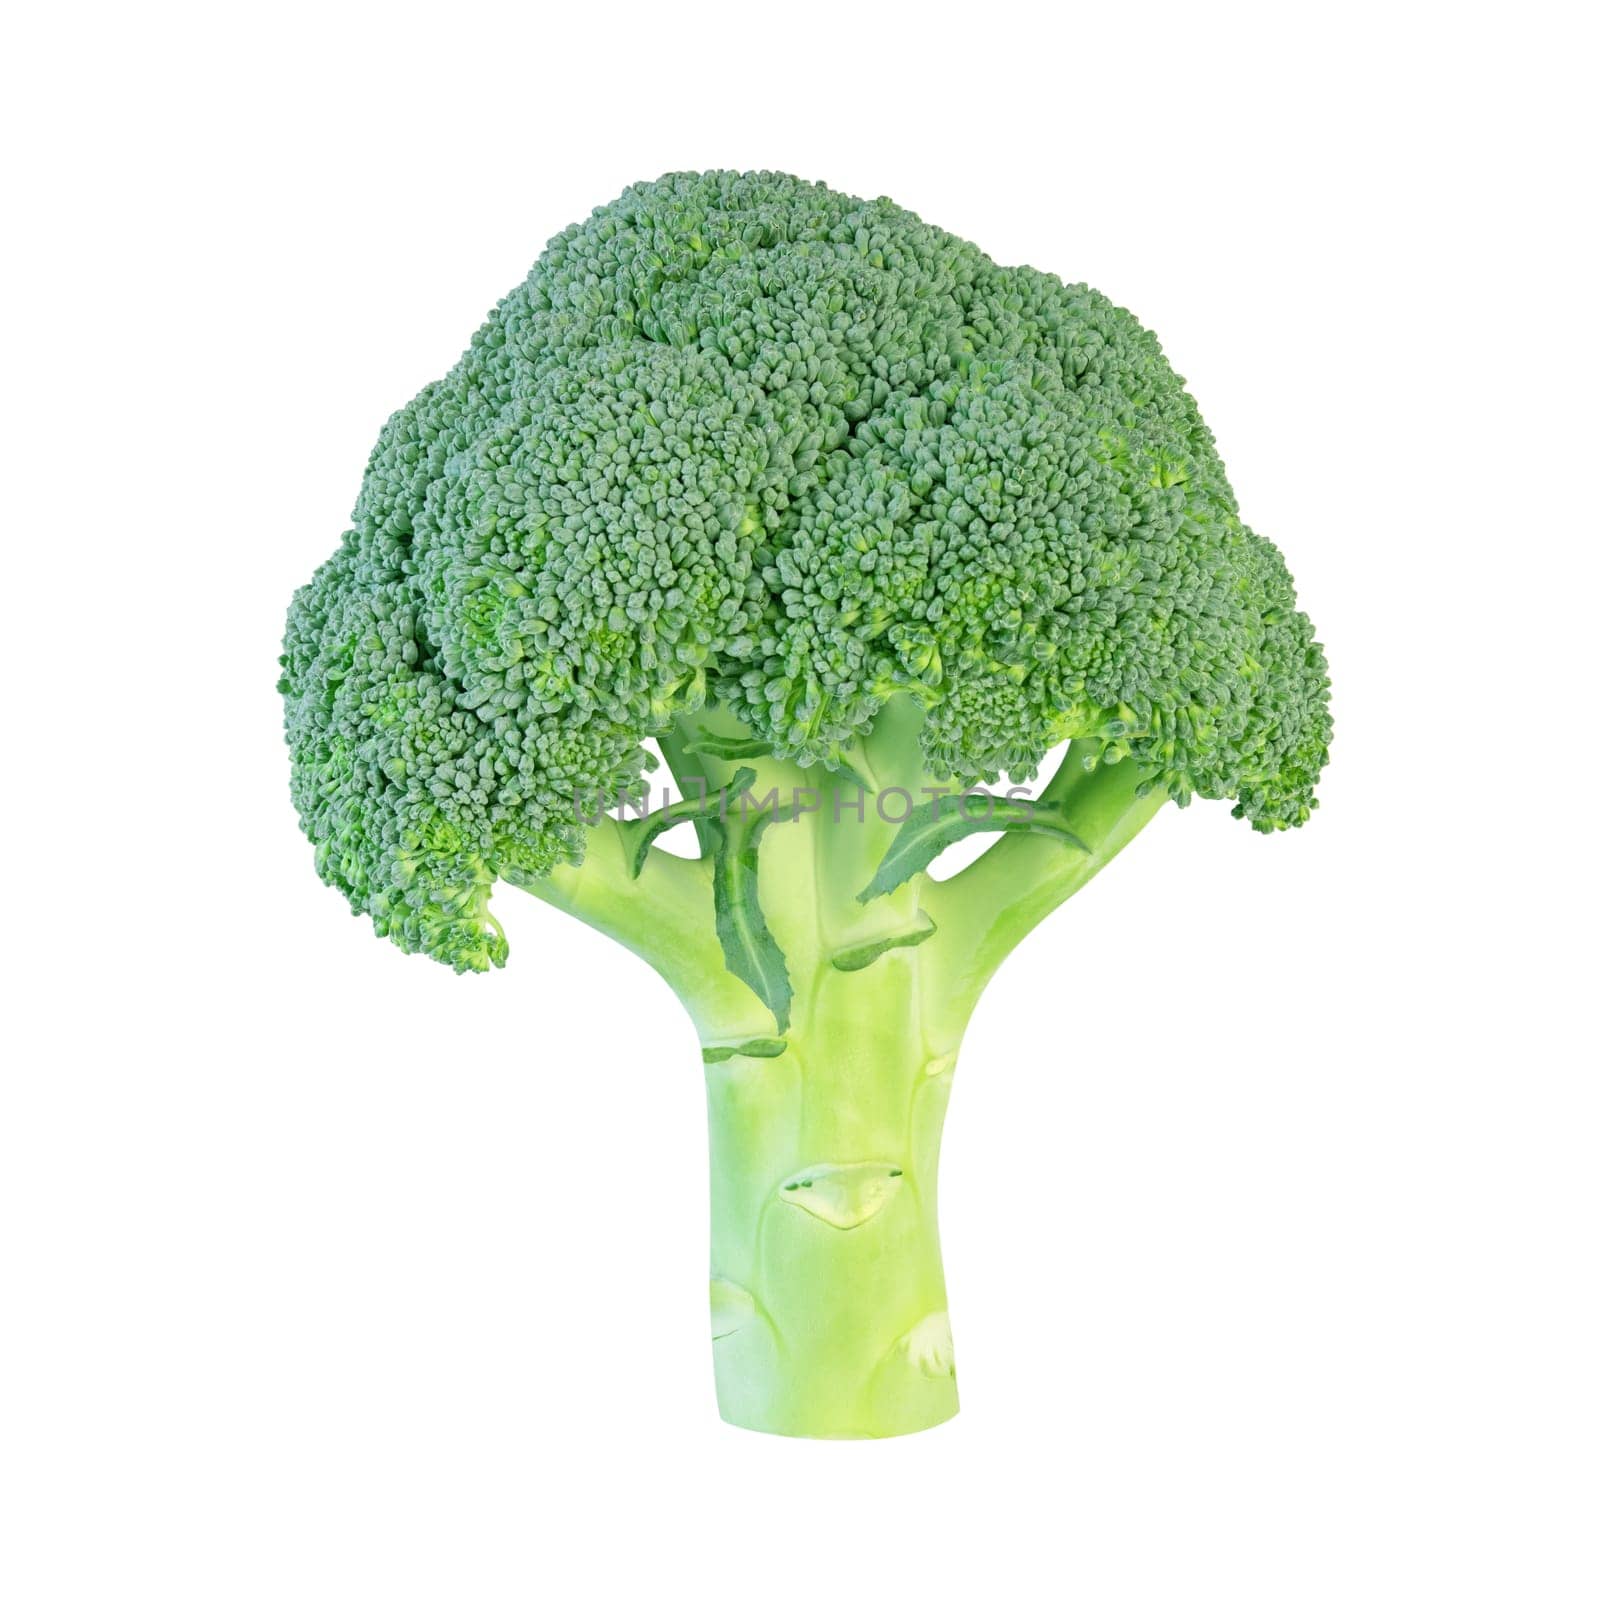 Perfect fresh broccoli cabbage isolated on a white background. Stock photography.